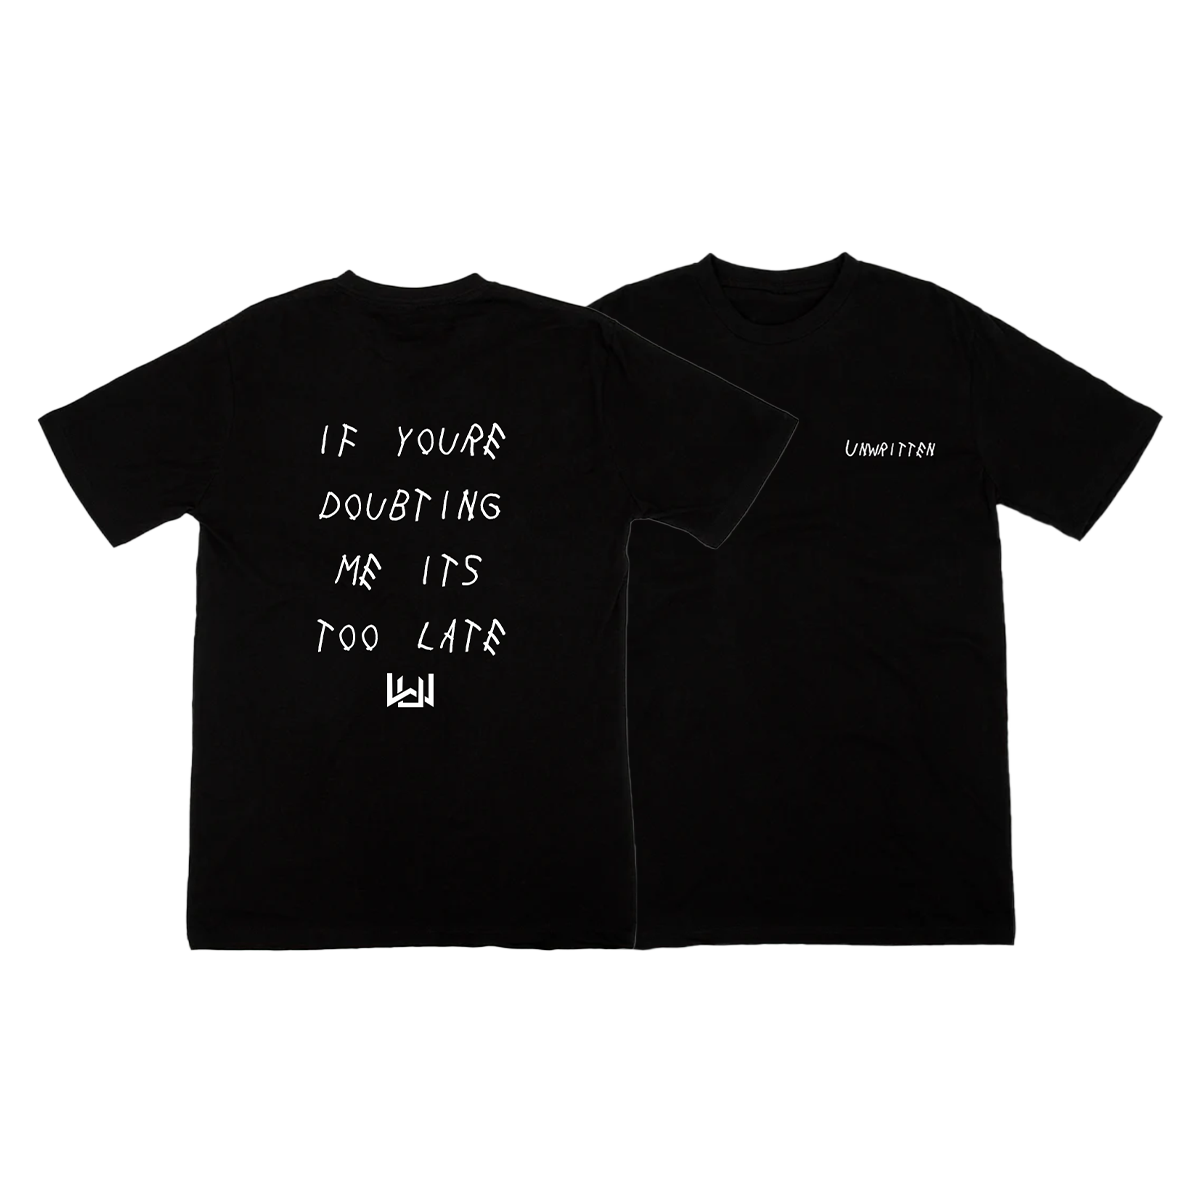 If You're Doubting Me Its Too Late Black T-Shirt